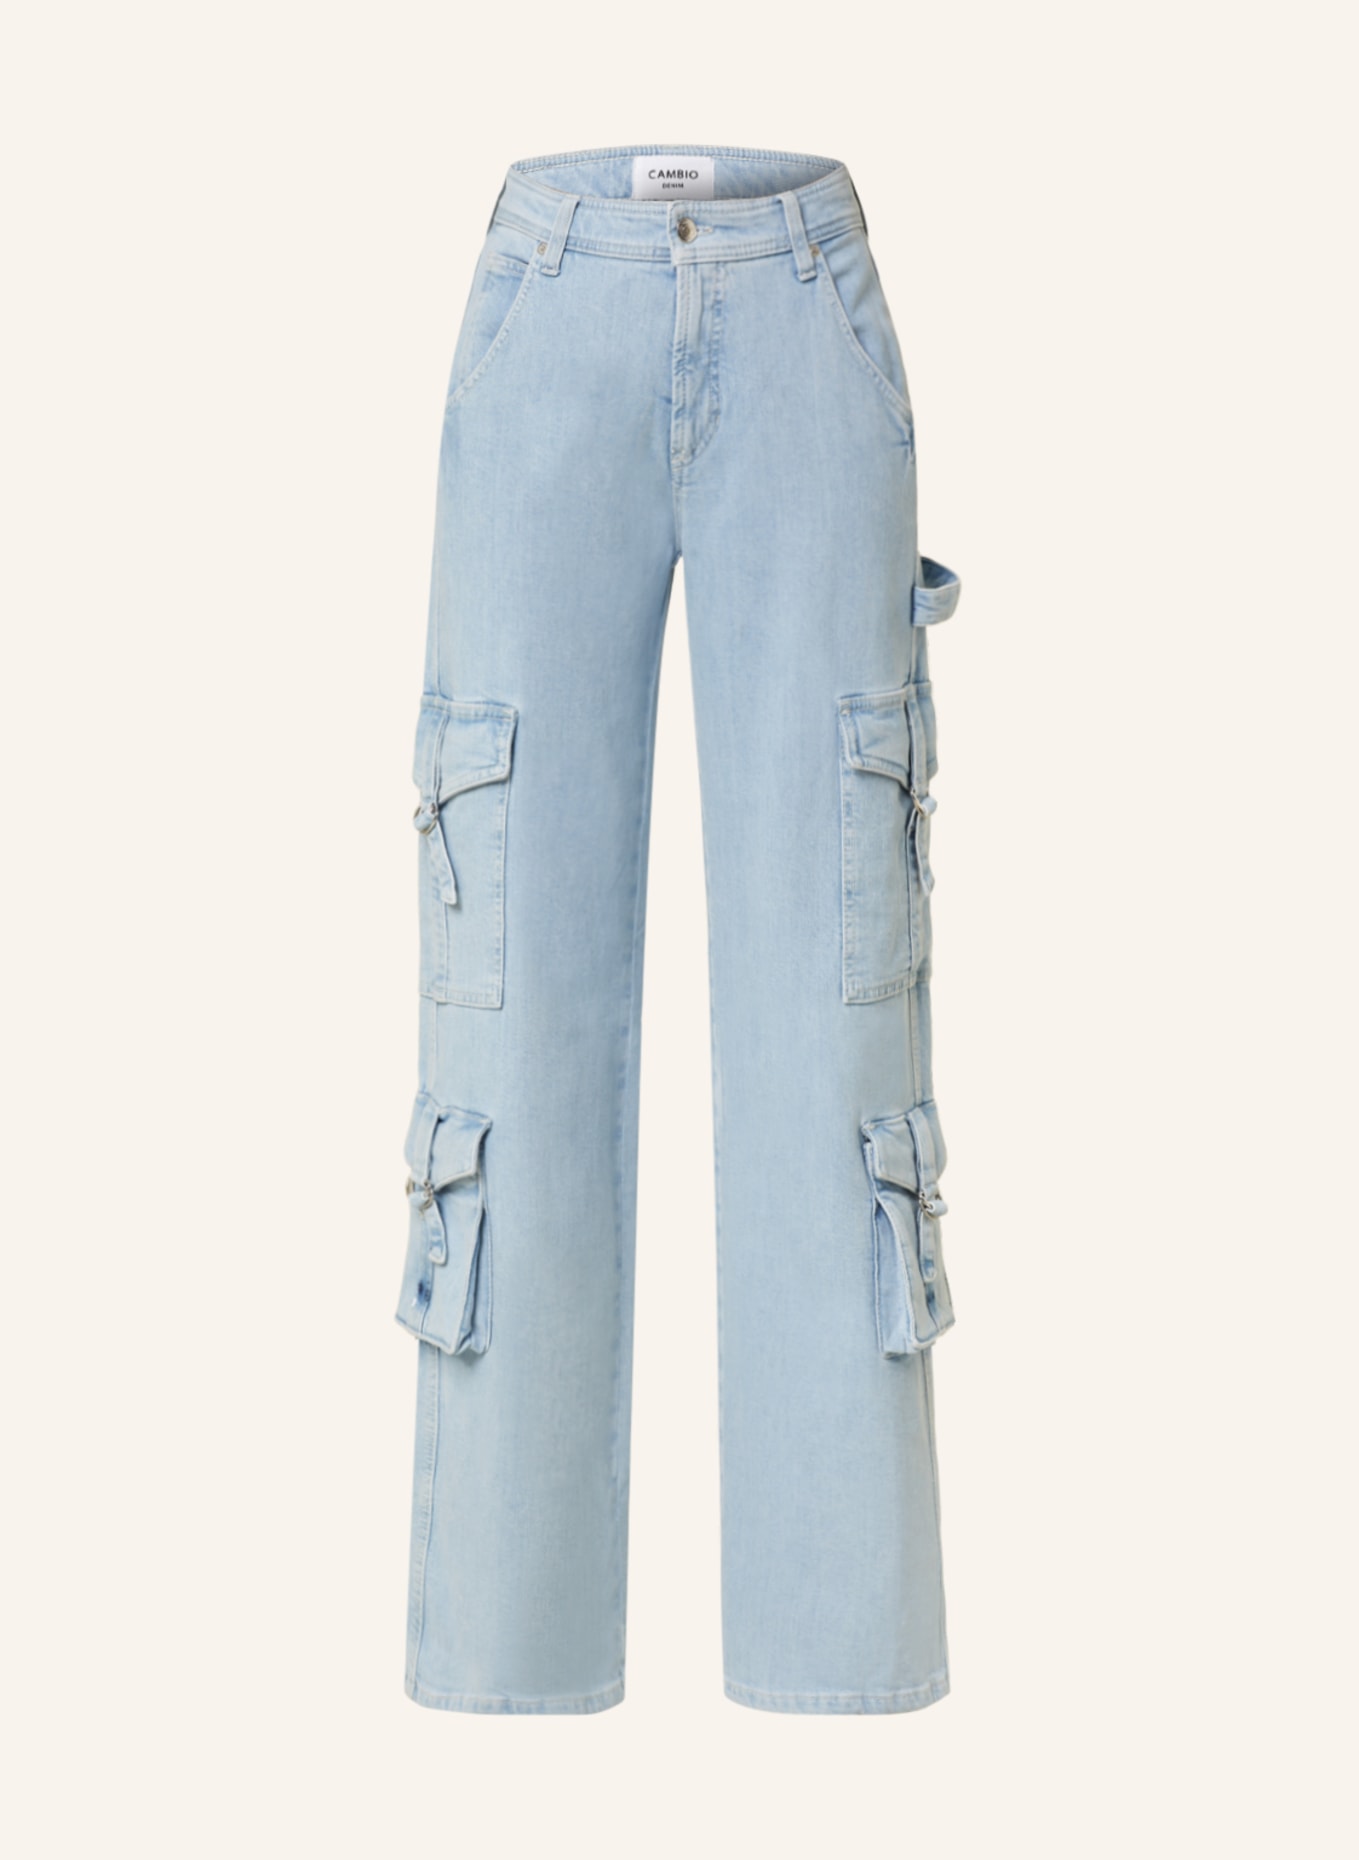 CAMBIO Cargo jeans ADELE, Color: 5320 90ty bleached contrast (Image 1)